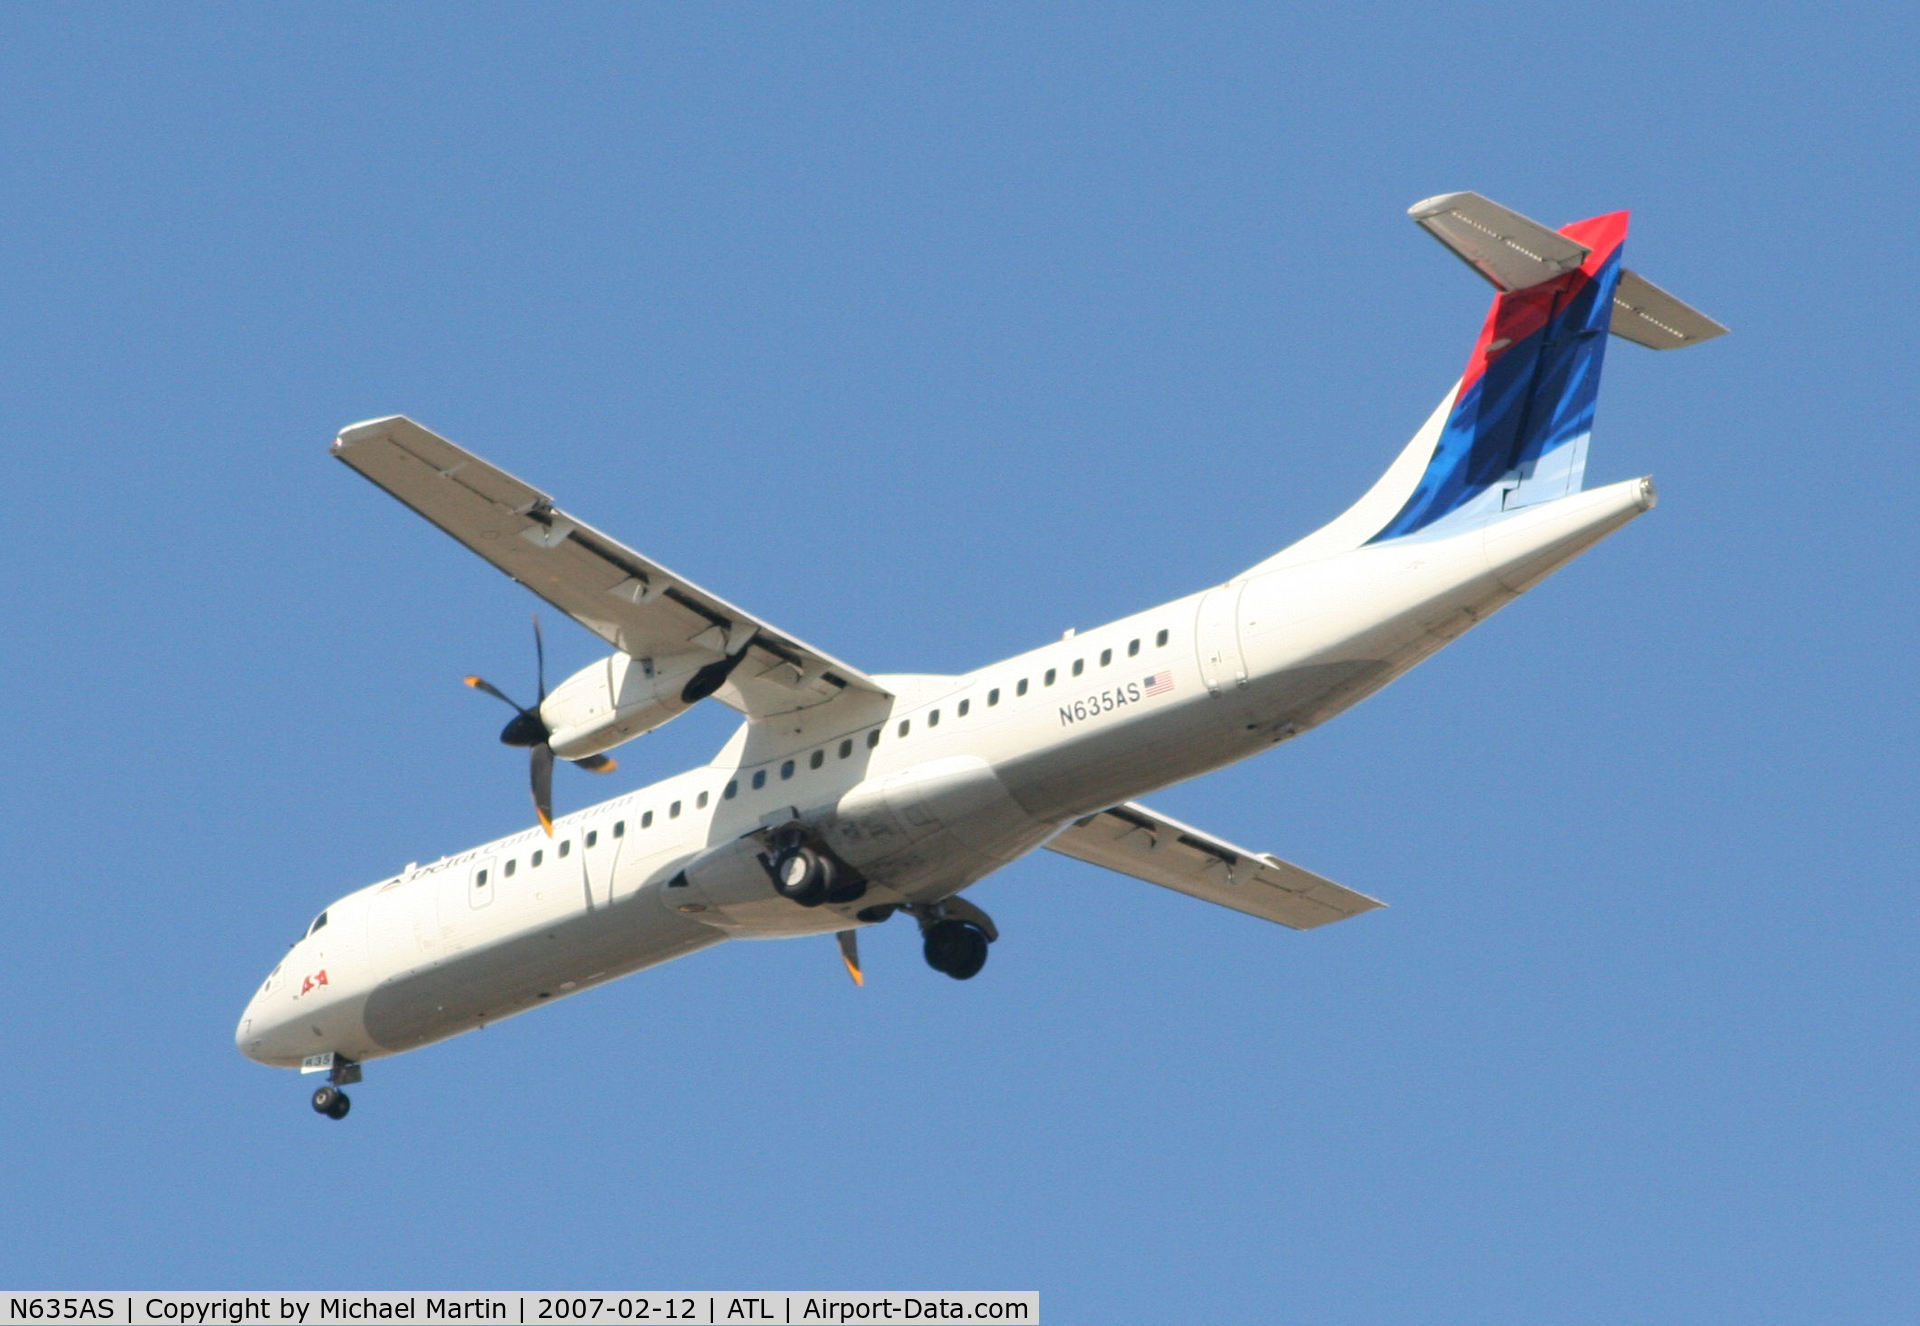 N635AS, 1993 ATR 72-212 C/N 372, Over the numbers of 26L